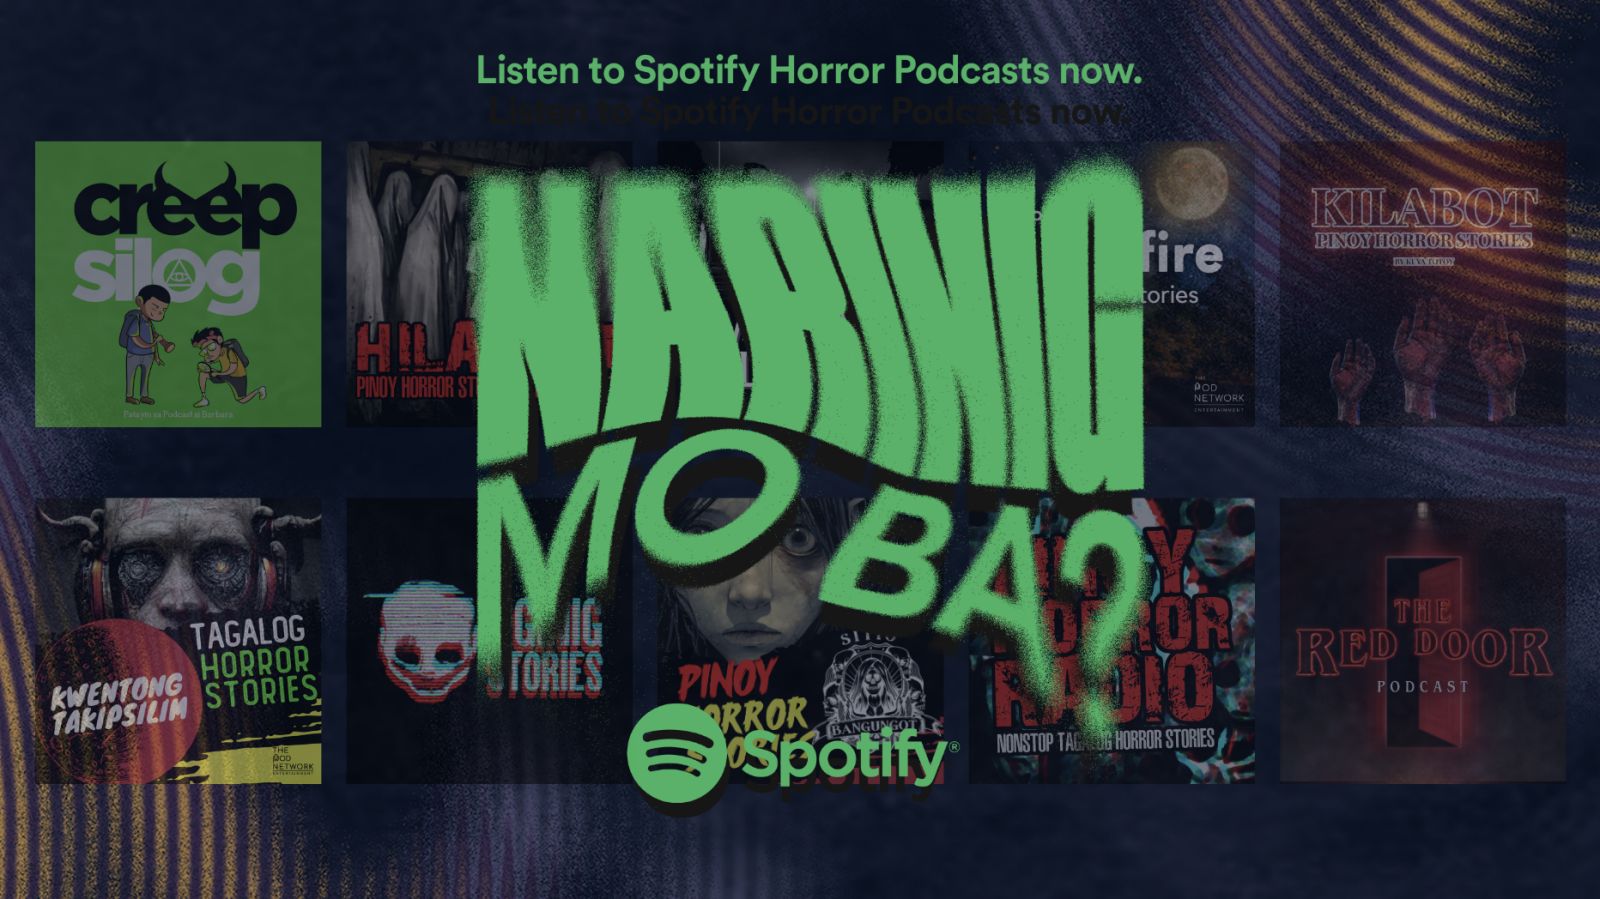 SPOTIFY HORROR PODCASTS